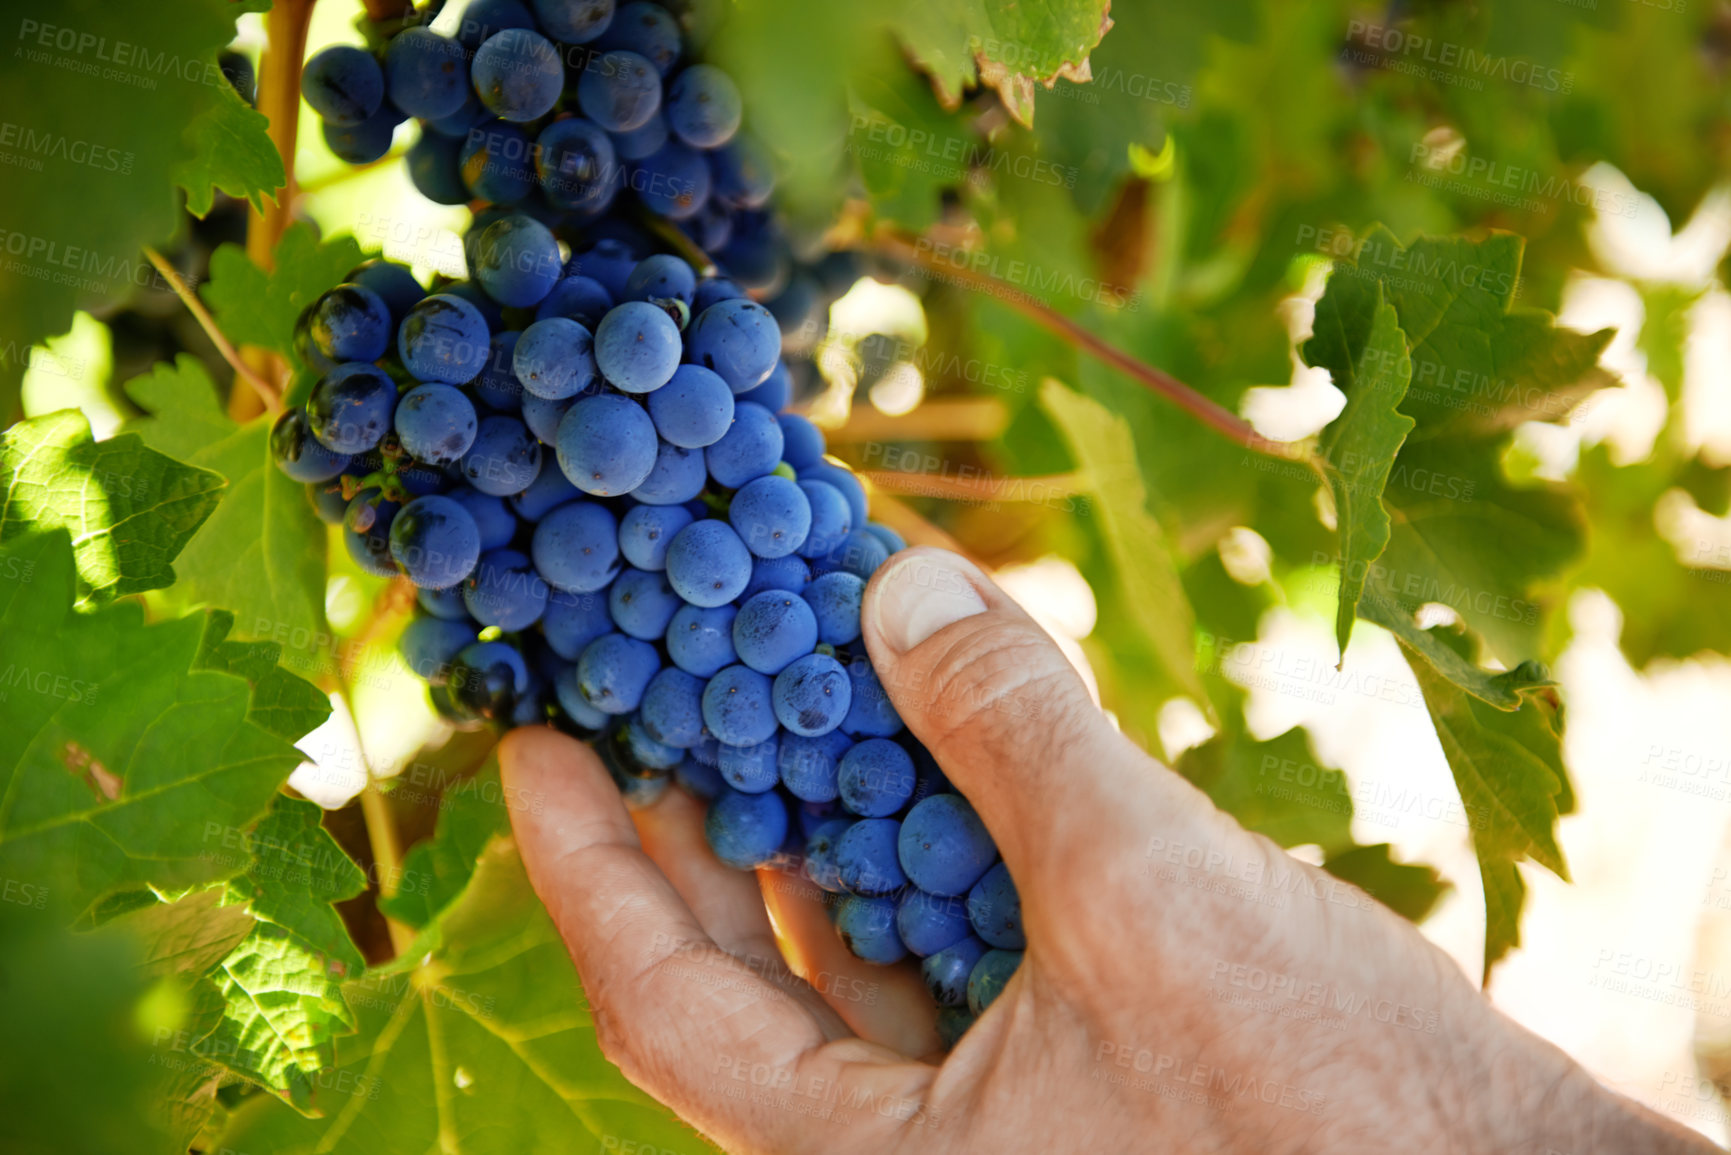 Buy stock photo Shot of a mature man inspecting grapes on a vine